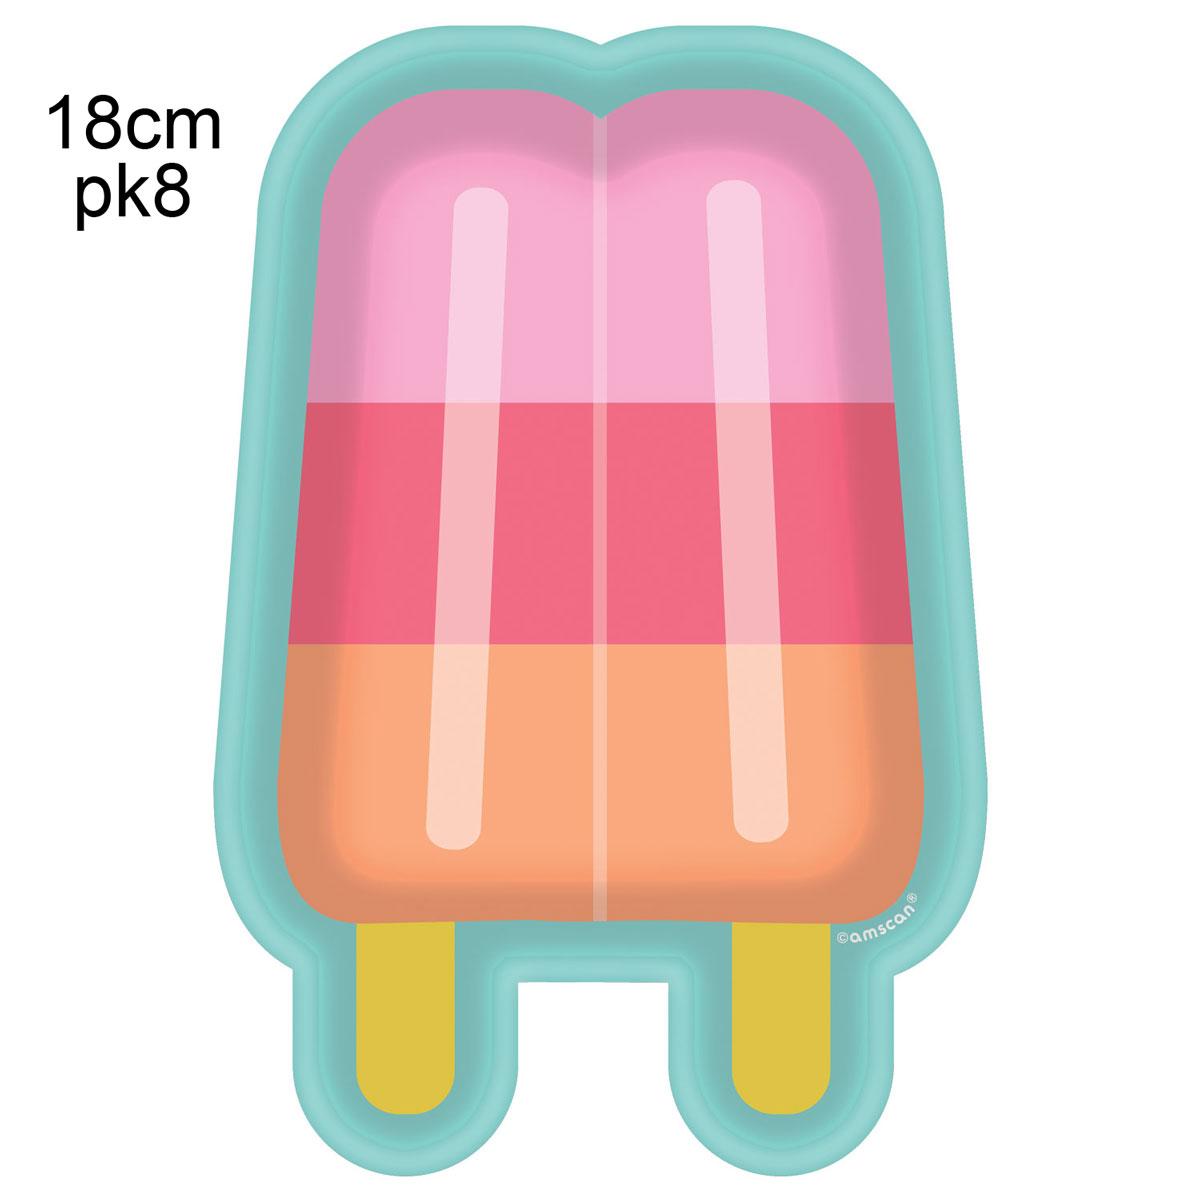 Just Chillin Popsicle Shaped Paper Plates 18cm pk8 by Amscan 432759 available here at Karnival Costumes online party shop